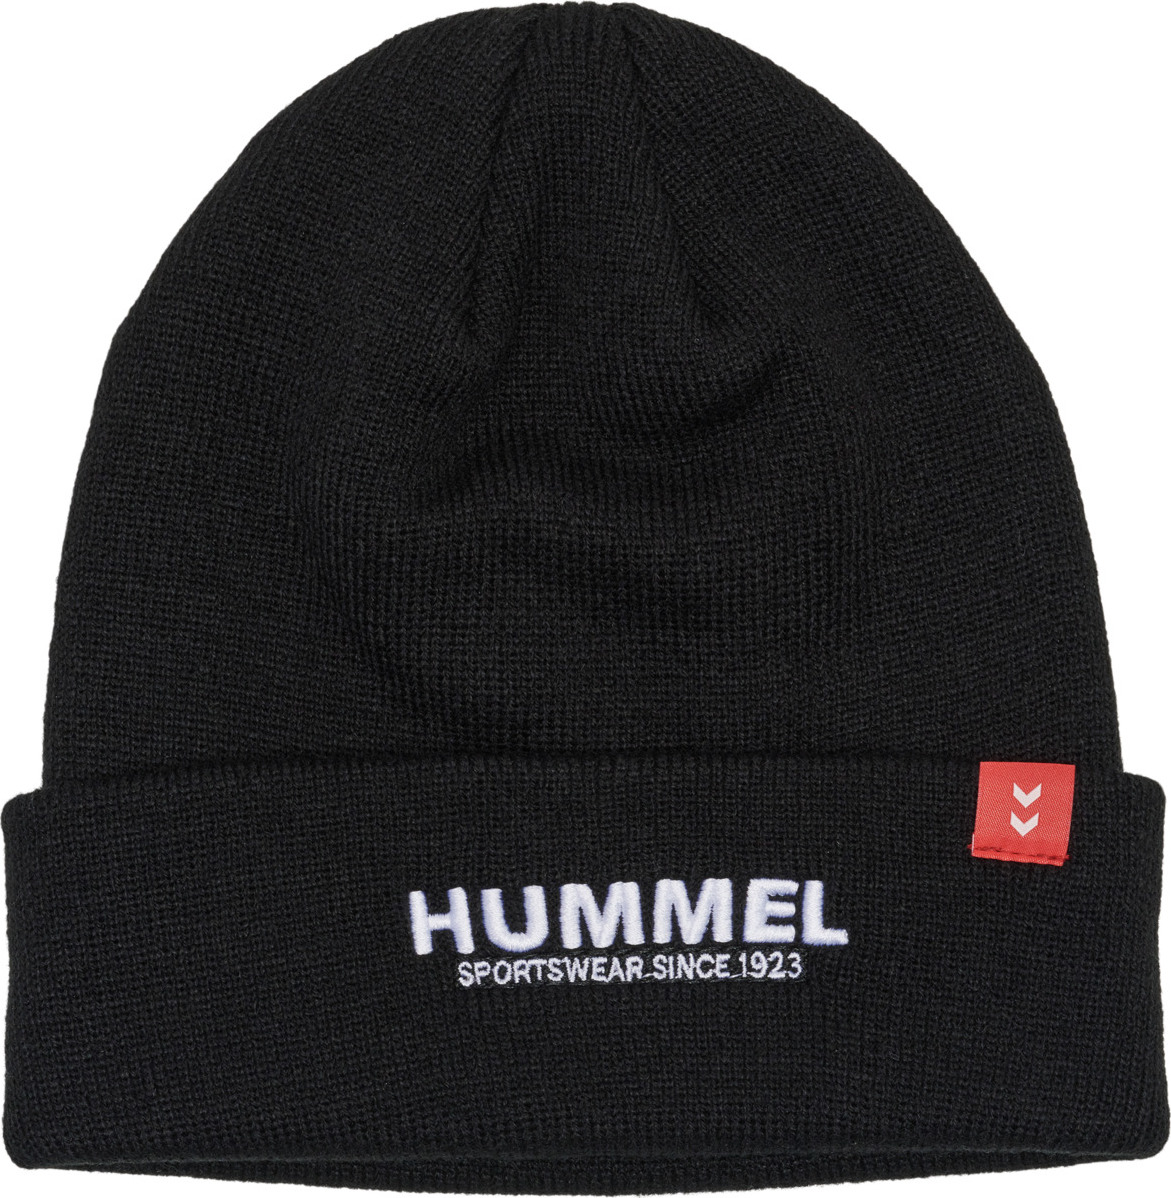 | Outnorth hmlLEGACY Core Beanie Buy Beanie here Core Black hmlLEGACY Black |